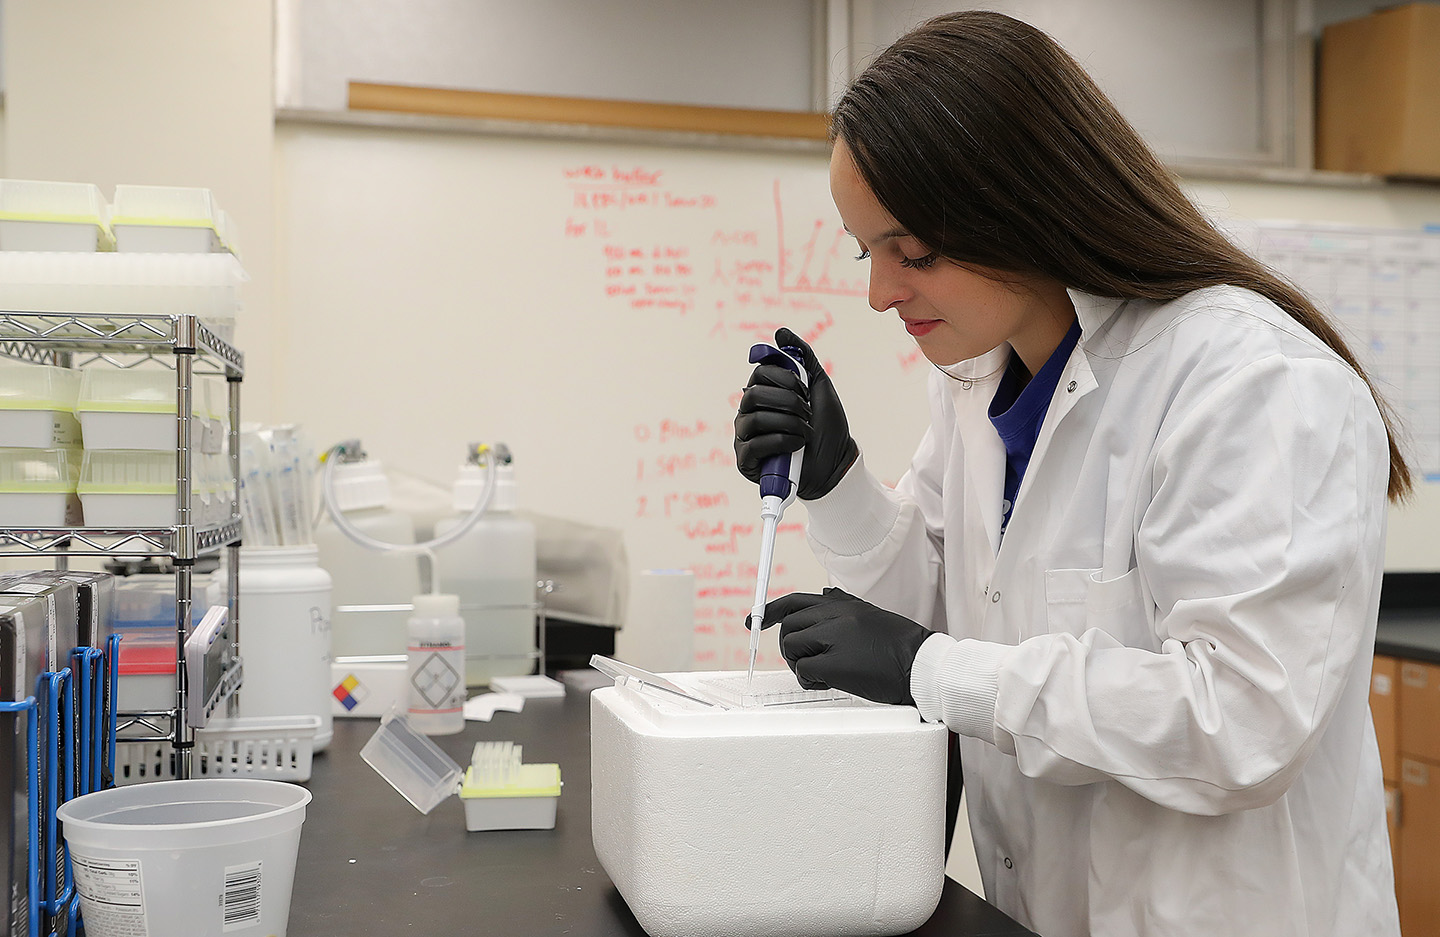 UNK senior Leigh-Anne Lehmann is part of a student research team working alongside assistant biology professor Joe Dolence to study food allergies. (Photos by Erika Pritchard, UNK Communications)